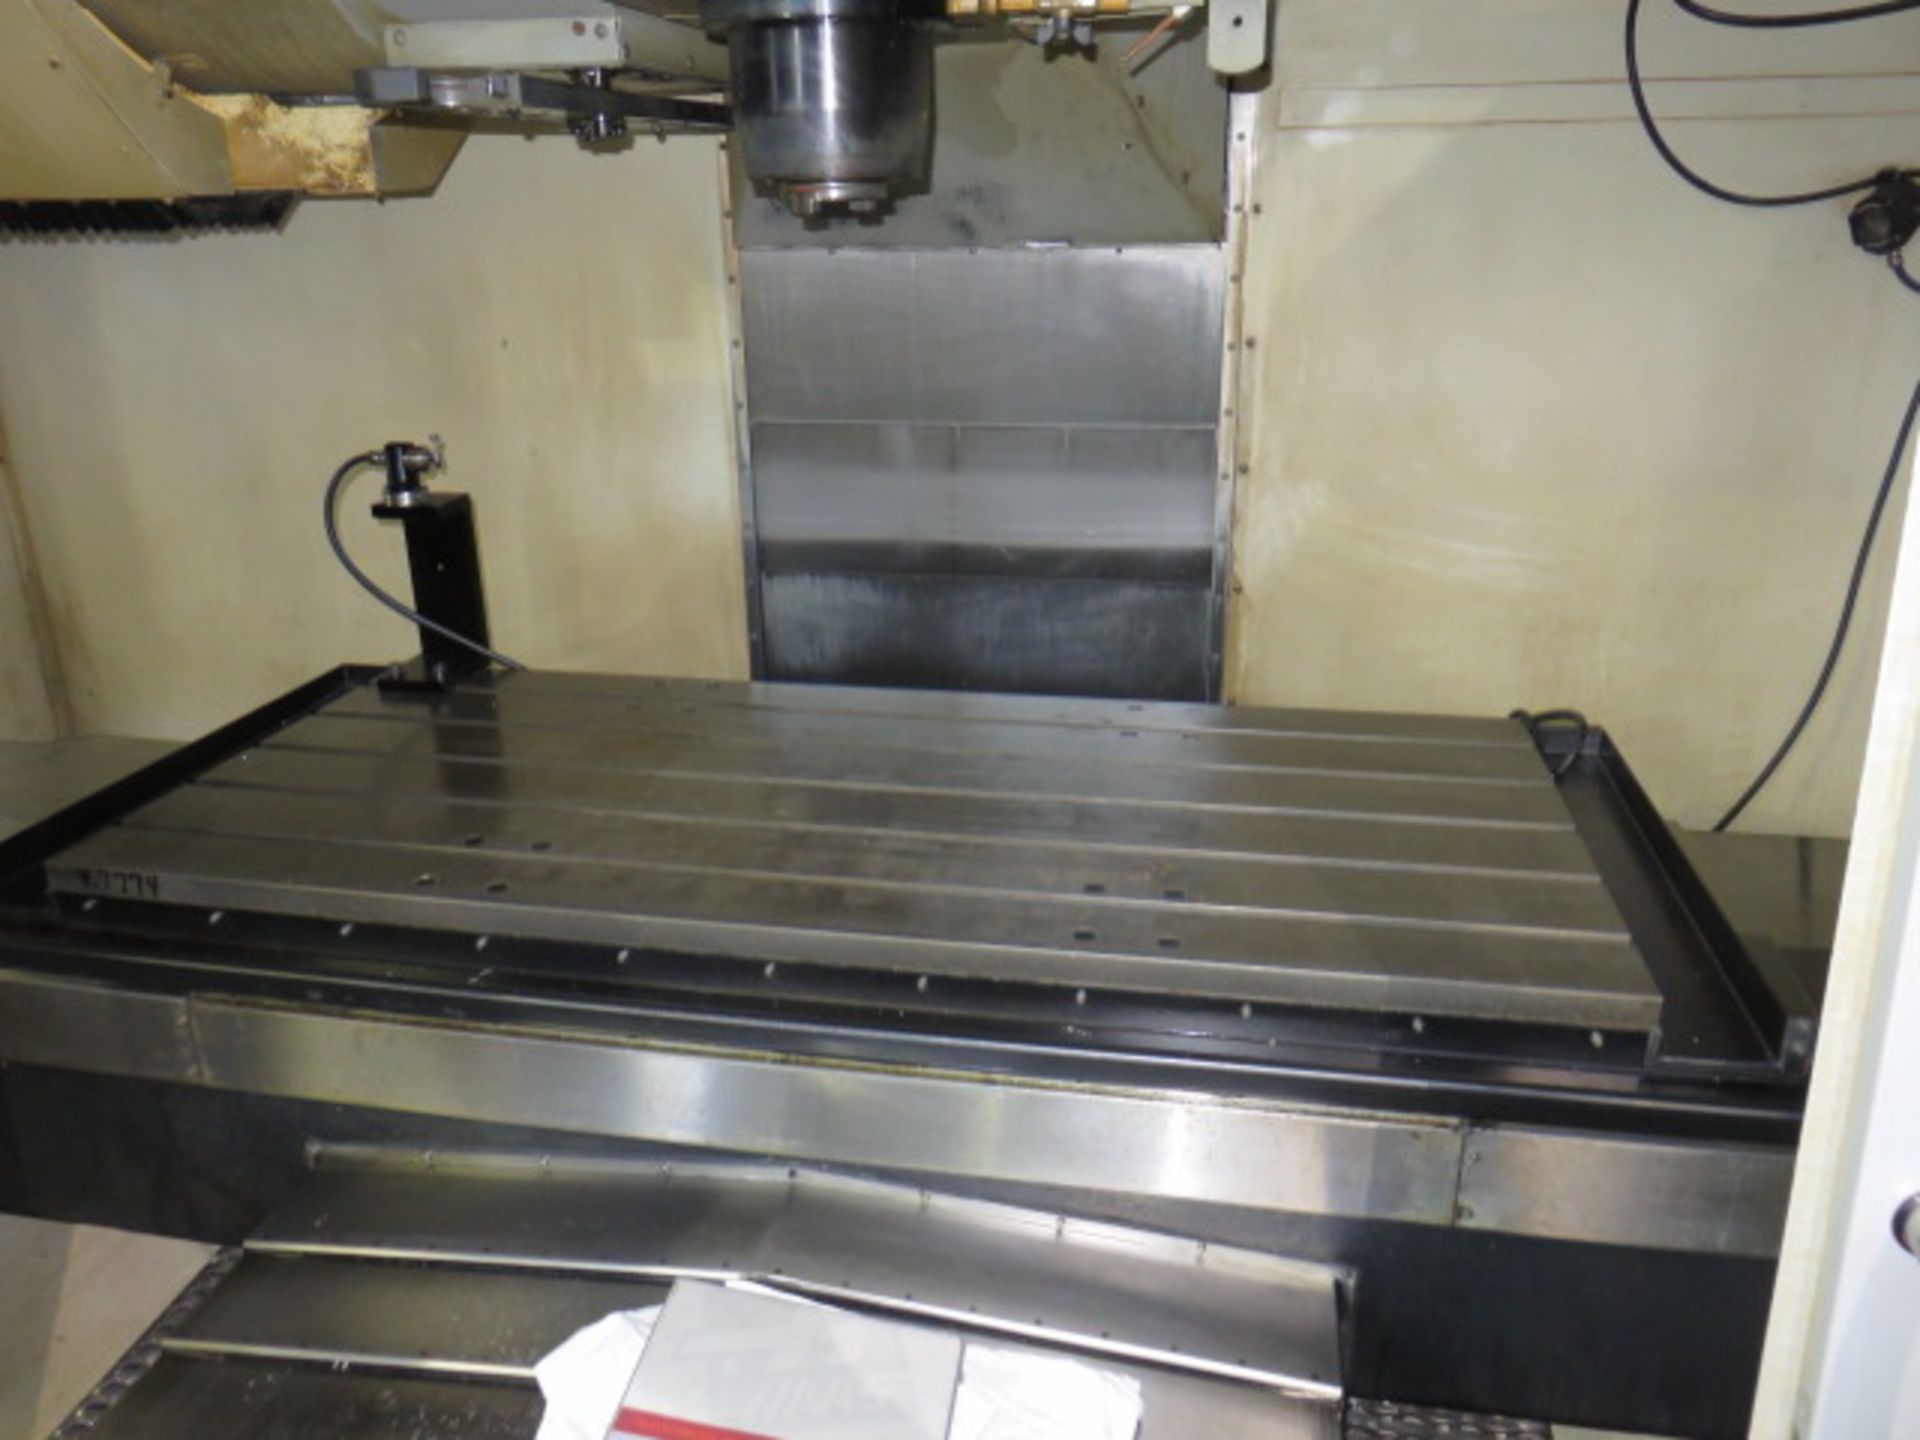 2006 HAAS VF-6/50 CNC VERTICAL MACHINING CENTER, S/N 1050547, WIRED FOR 5 AXIS , (REPLACED SPNDL.) - Image 3 of 7